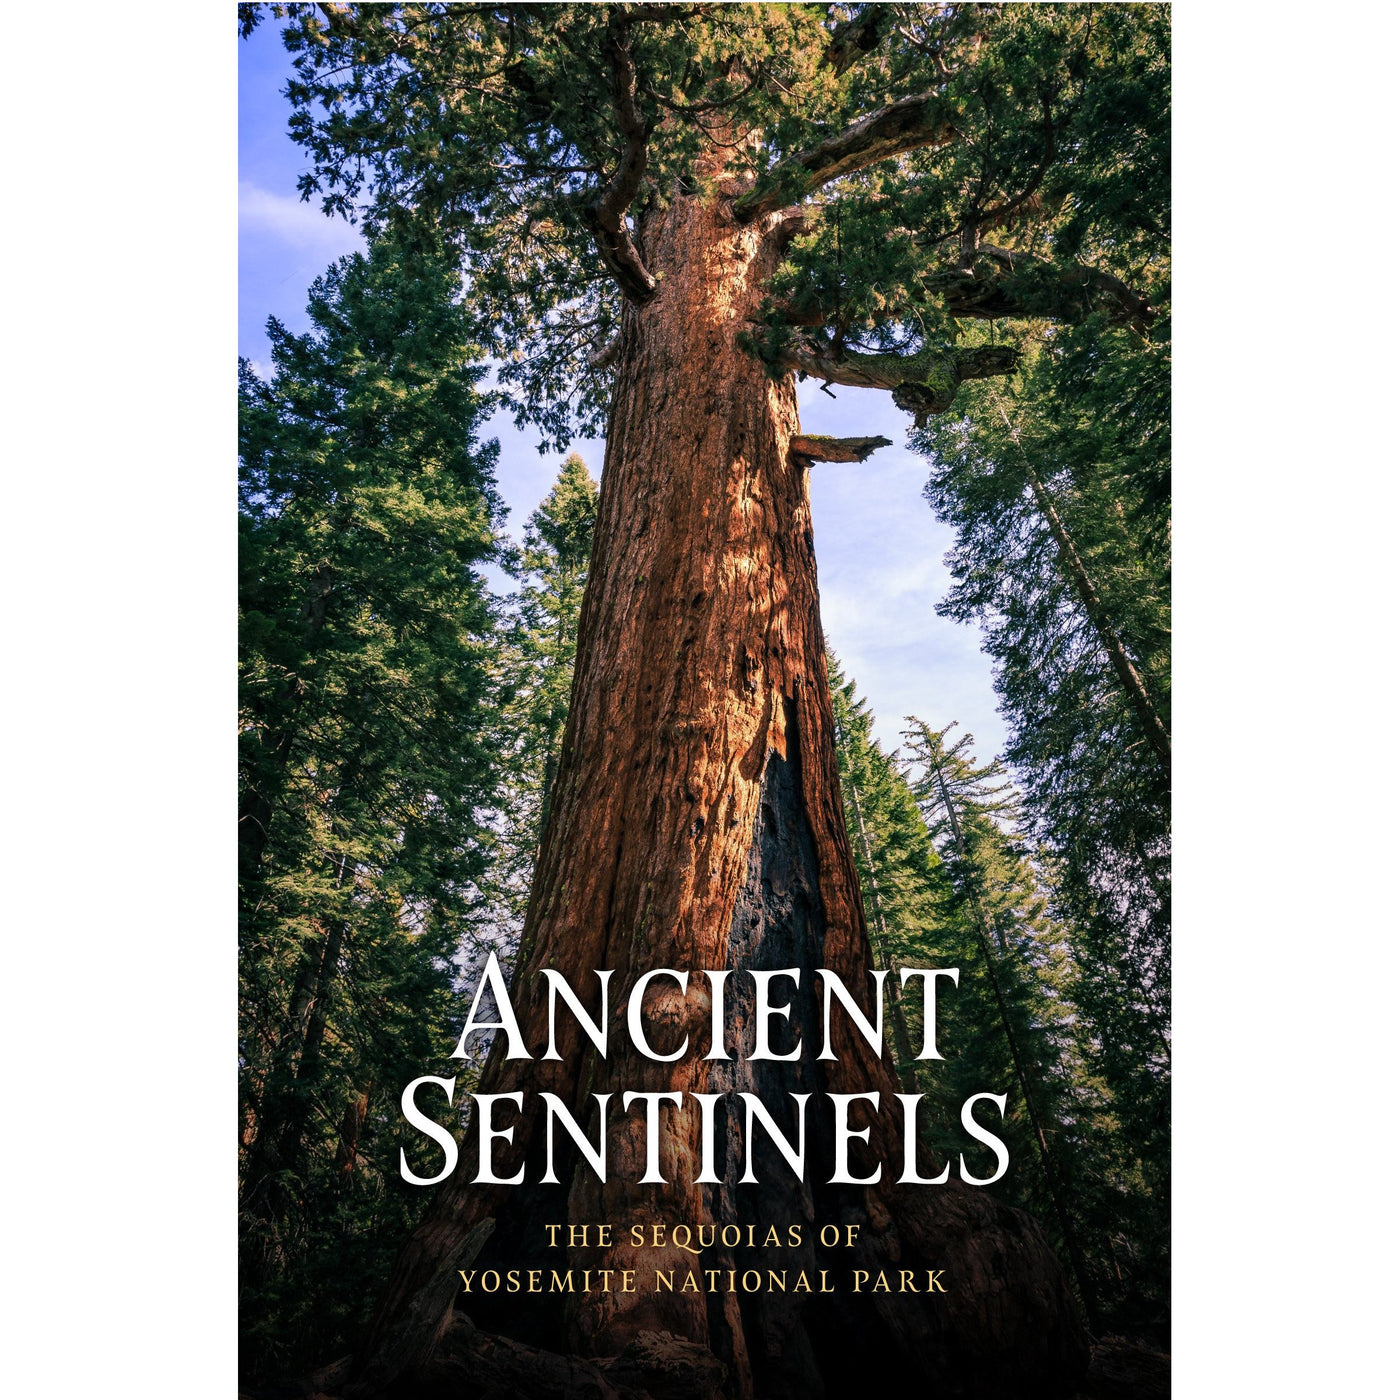 Ancient Sentinels: The Sequoias of Yosemite National Park